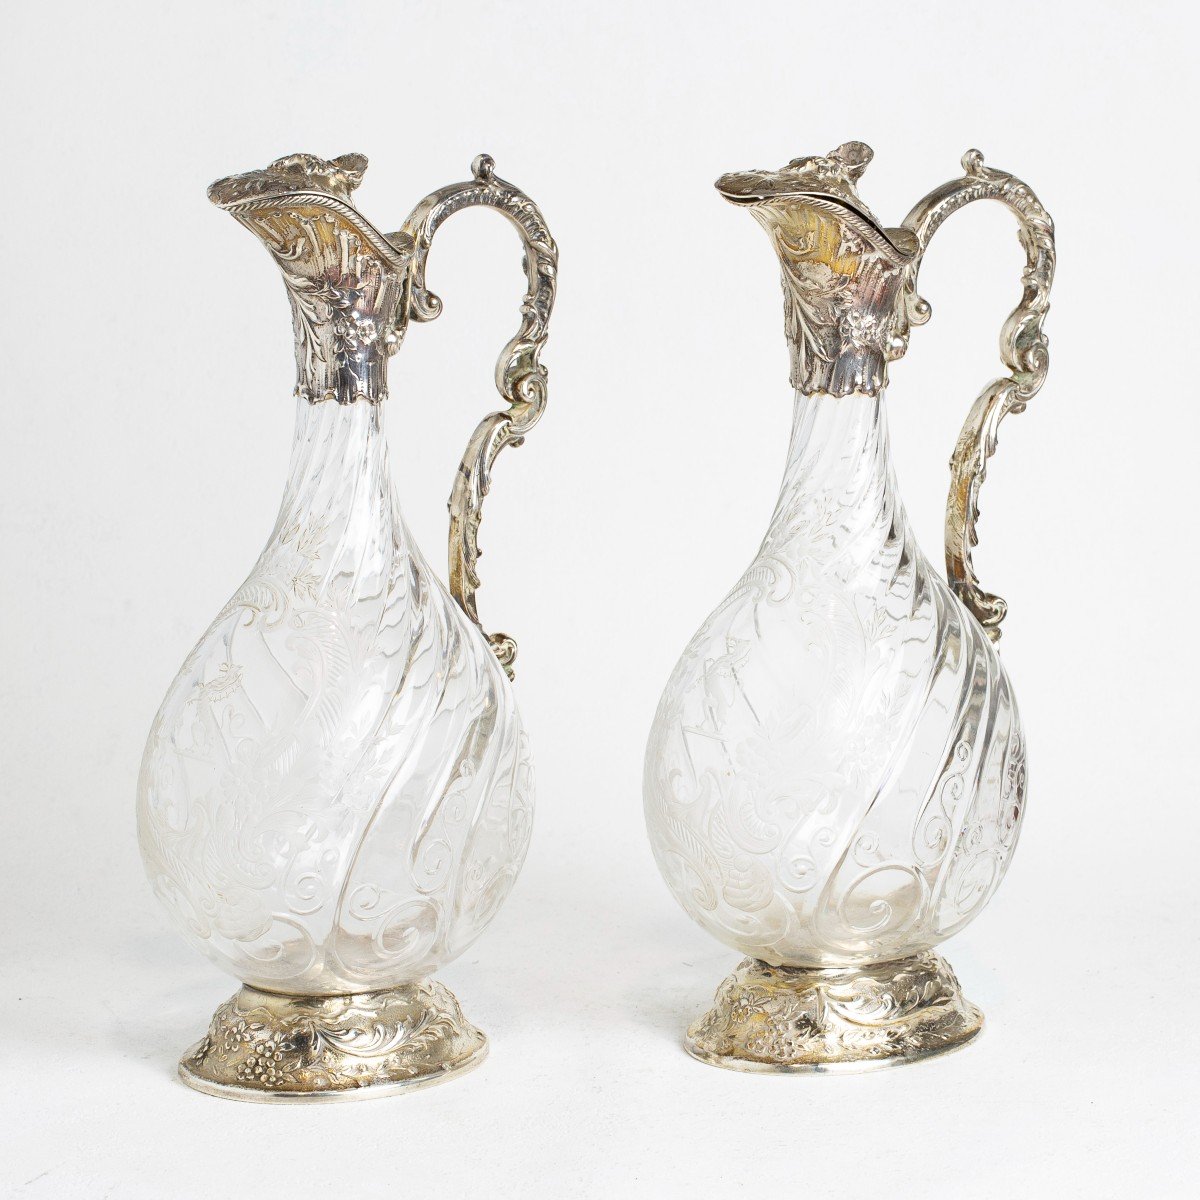 A Pair Of Silver And Cut Glass Claret Jugs